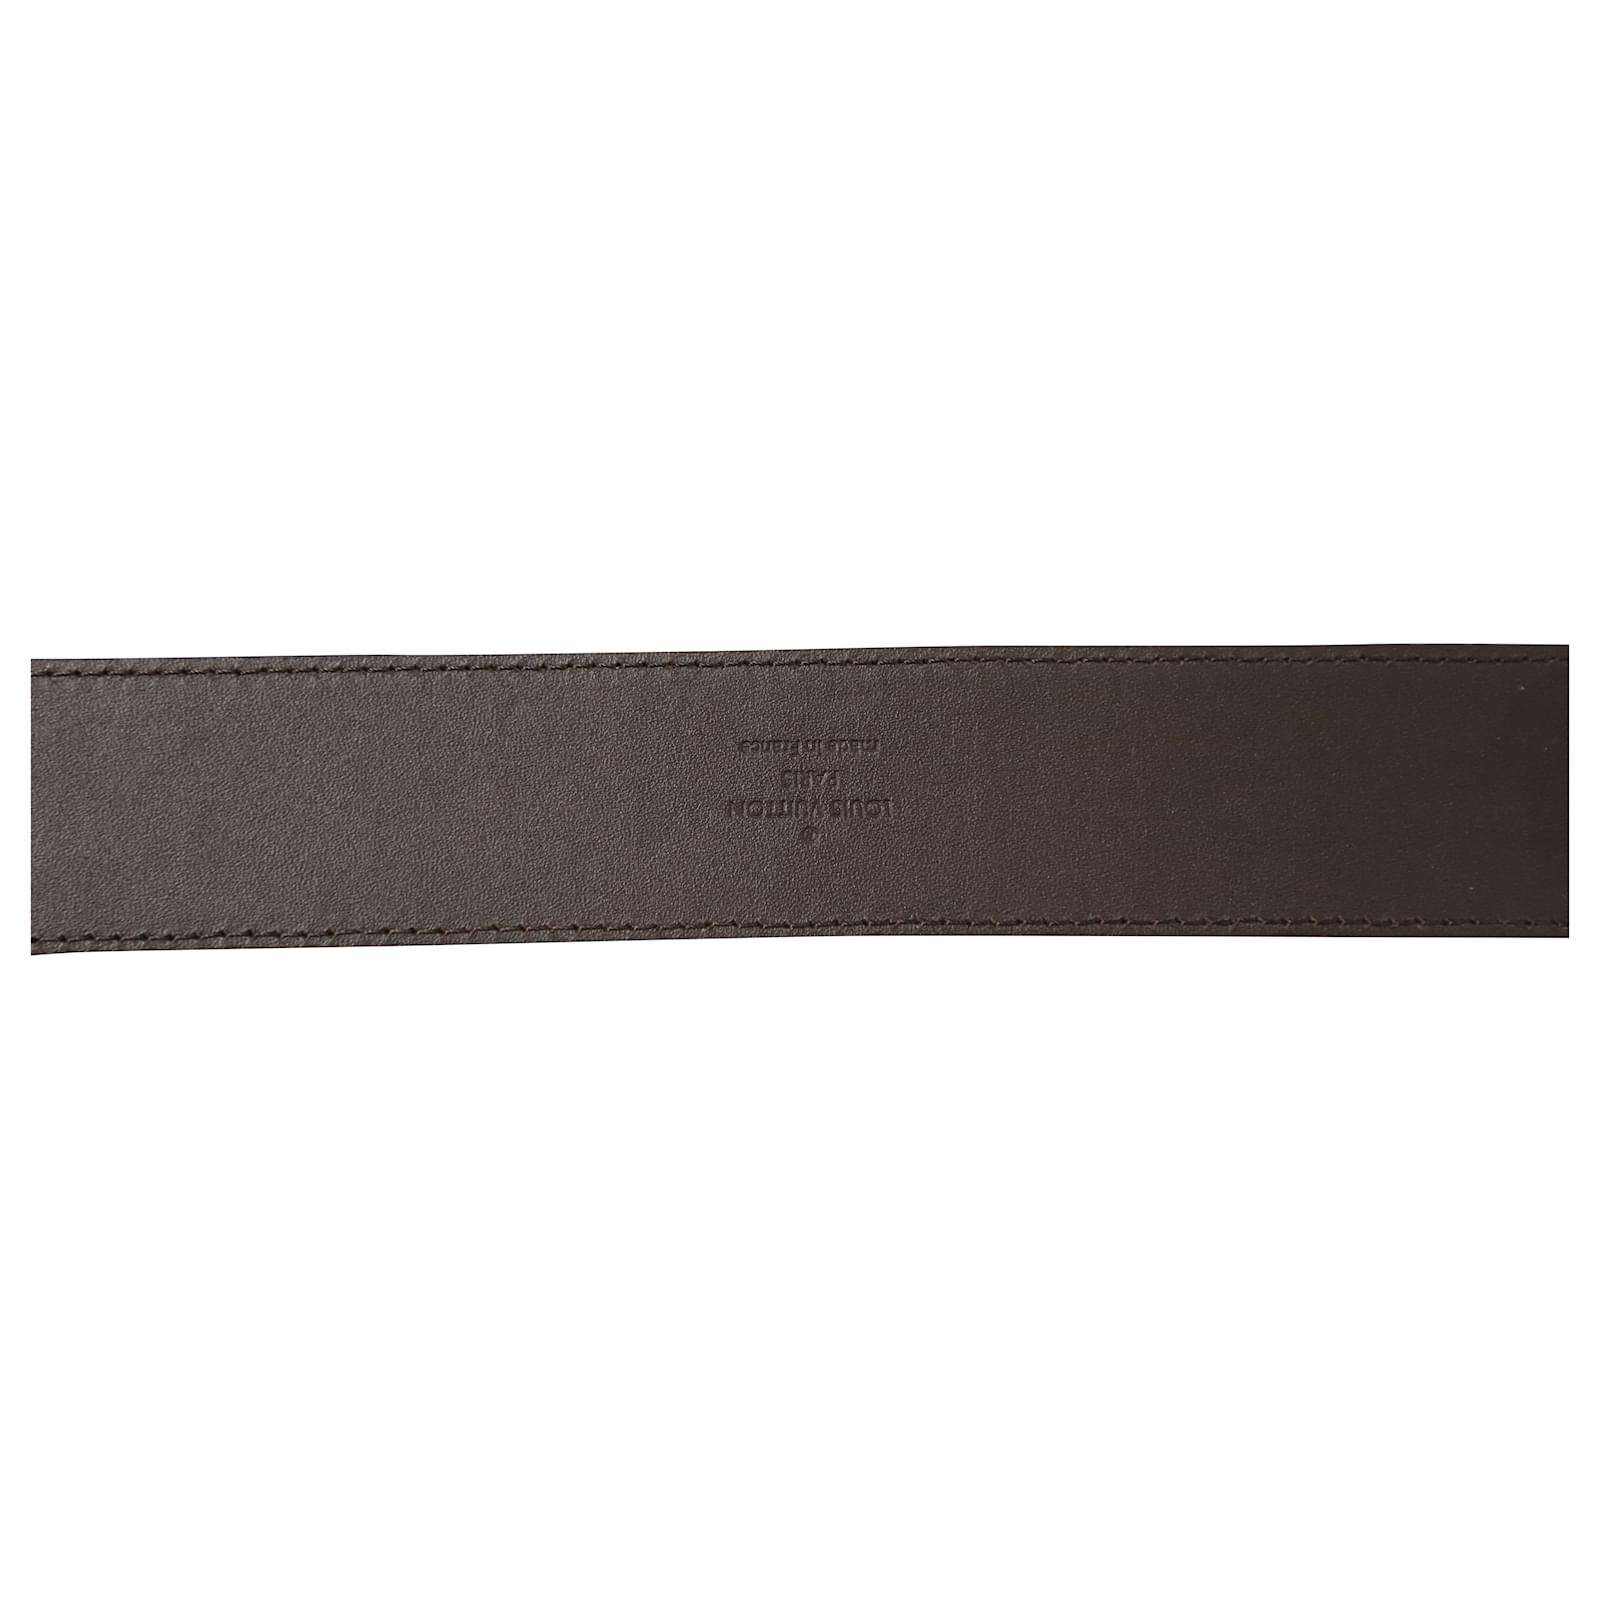 Louis Vuitton Belt Initiales Damier Ebene Canvas/Leather Brown in  Canvas/Leather with Mocha Brown - US